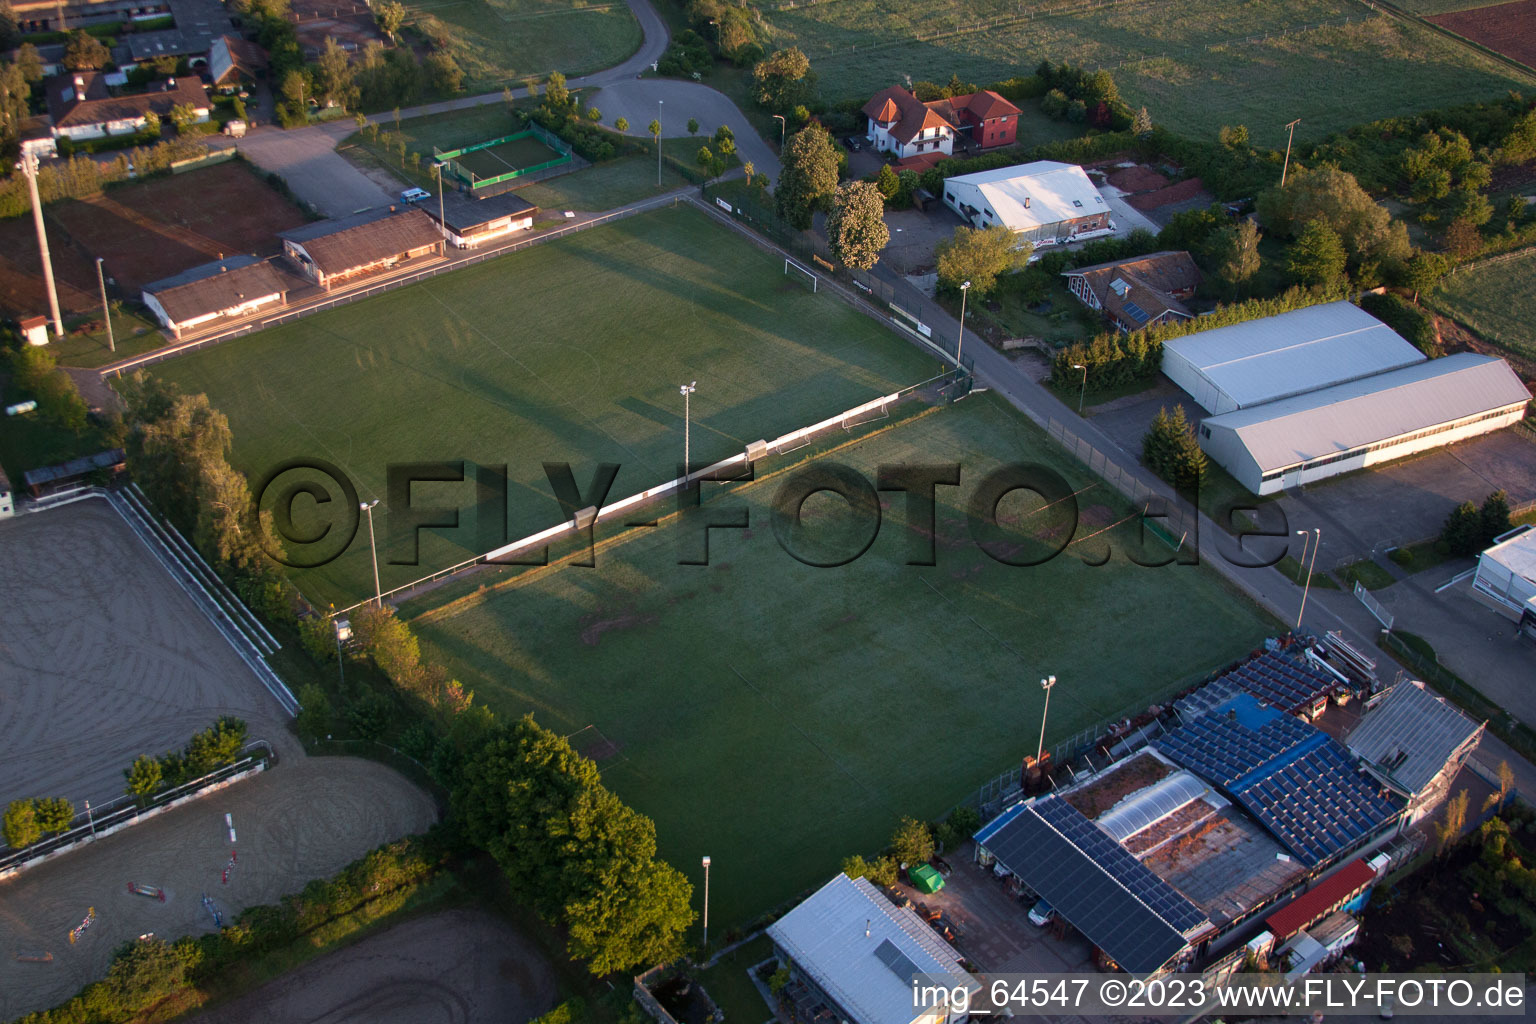 Aerial view of Riding and driving club e. V. Billigheim in Billigheim-Ingenheim in the state Rhineland-Palatinate, Germany